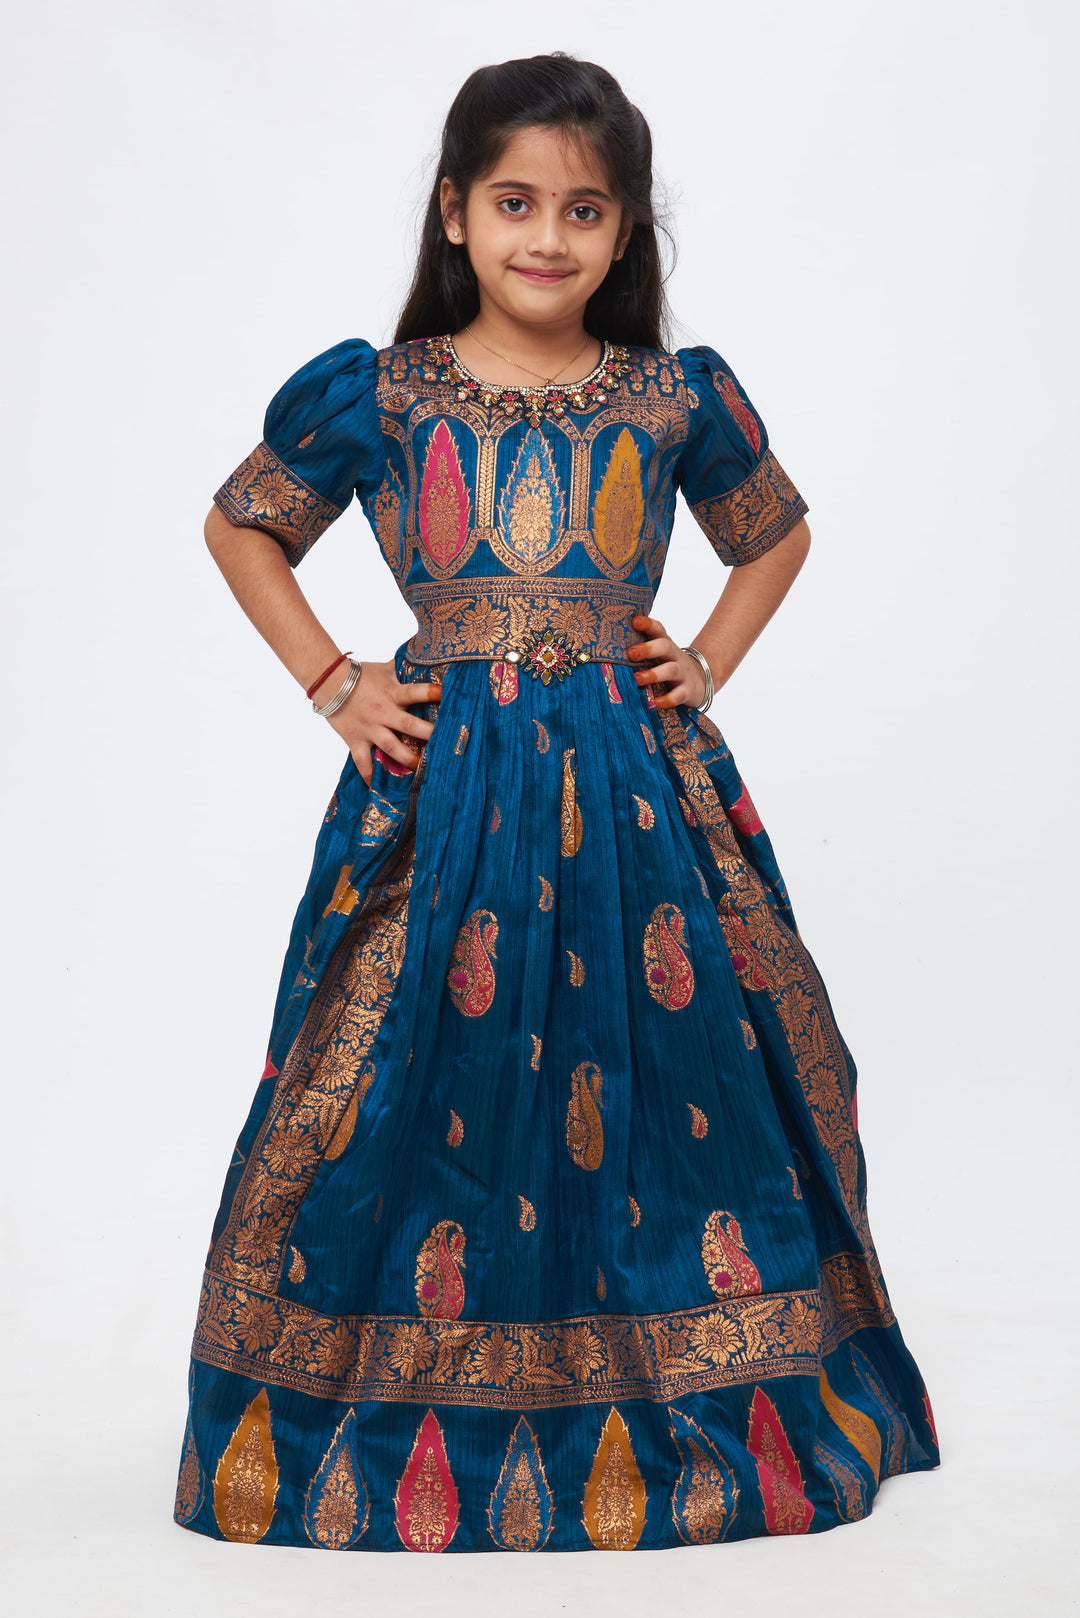 The Nesavu Girls Party Gown Emerald Elegance: Flowing Floral Printed Ethnic Anarkali Gown Nesavu 24 (5Y) / Blue / Viscose Silk GA158A-24 Teal Floral Printed Girls' Ethnic Gown with Matching Purse | Latest Anarkali Gown designs | The Nesavu